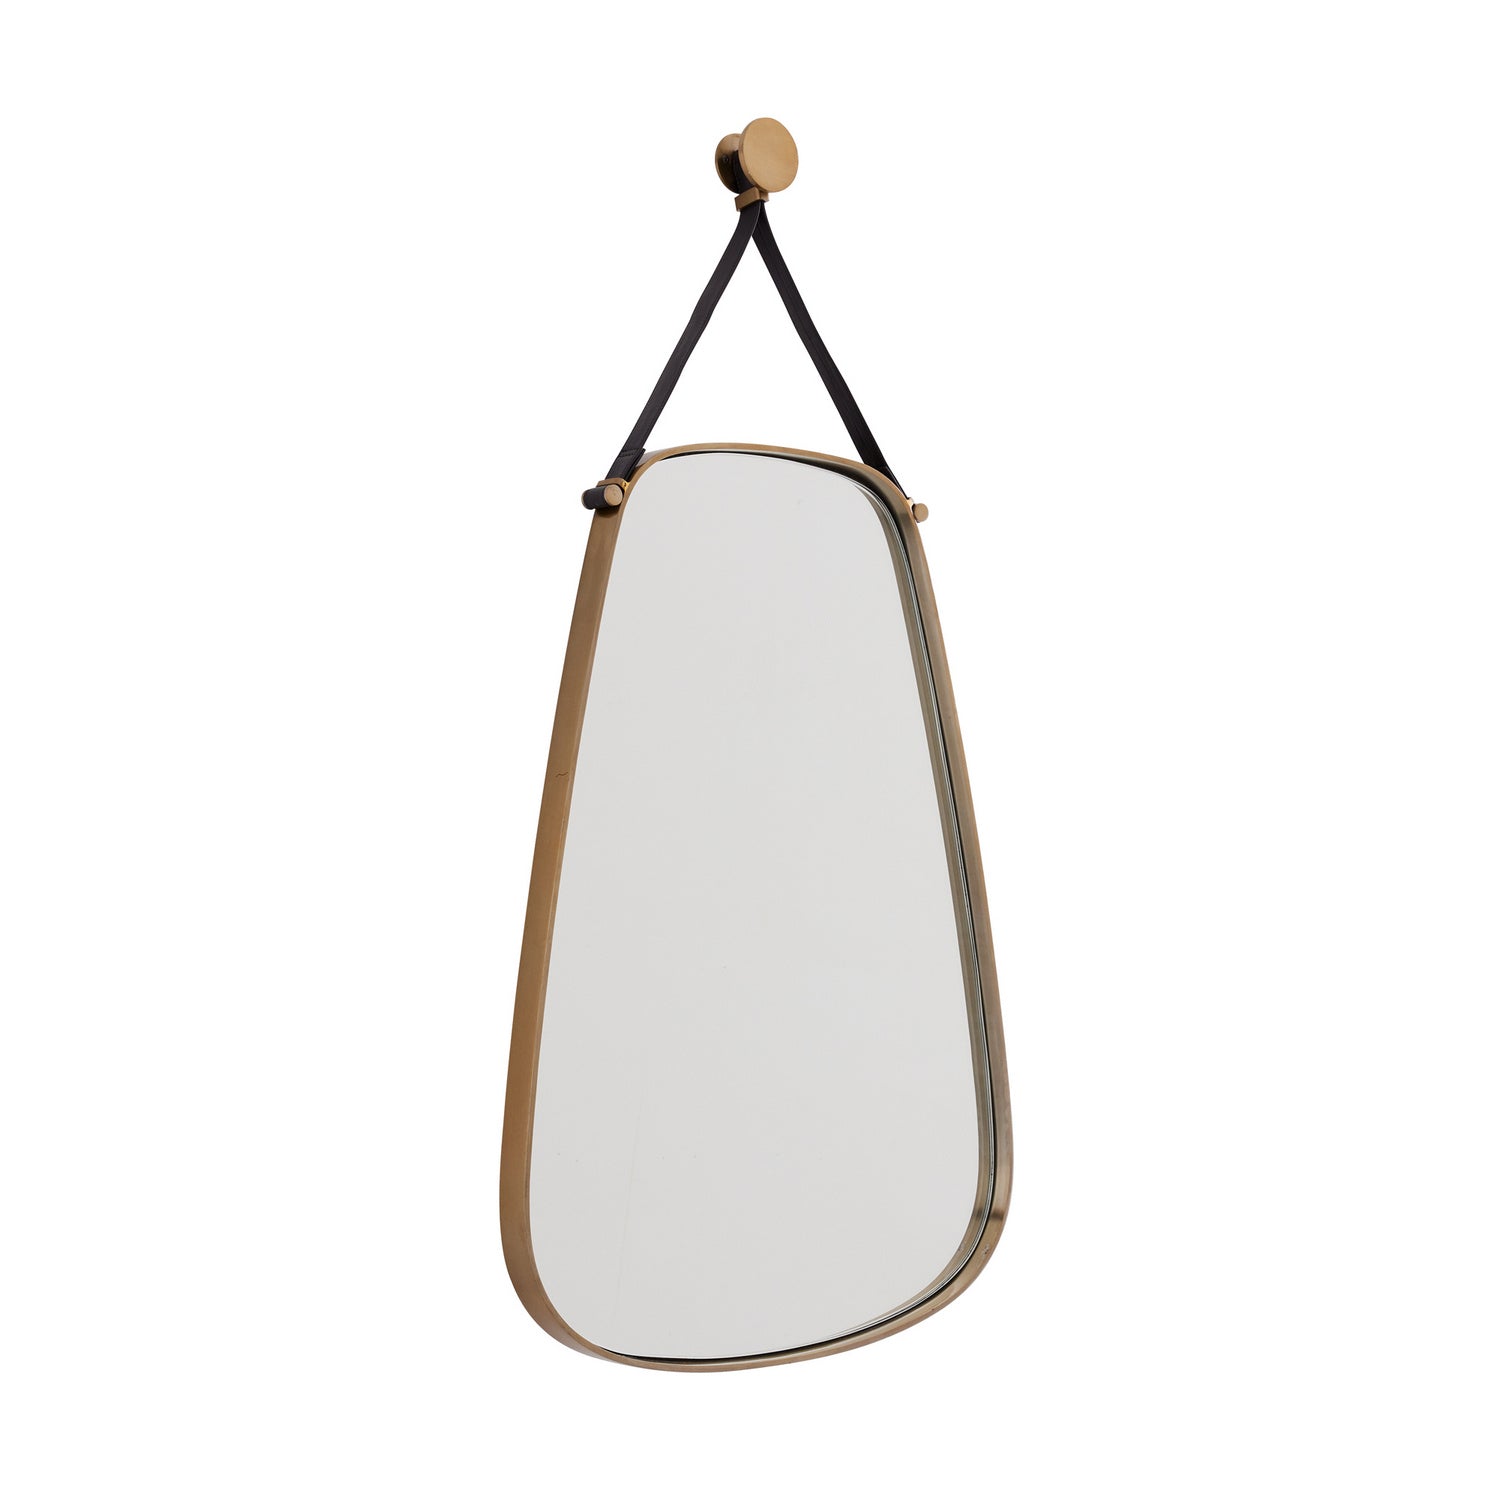 Mirror from the Norissa collection in Antique Brass finish